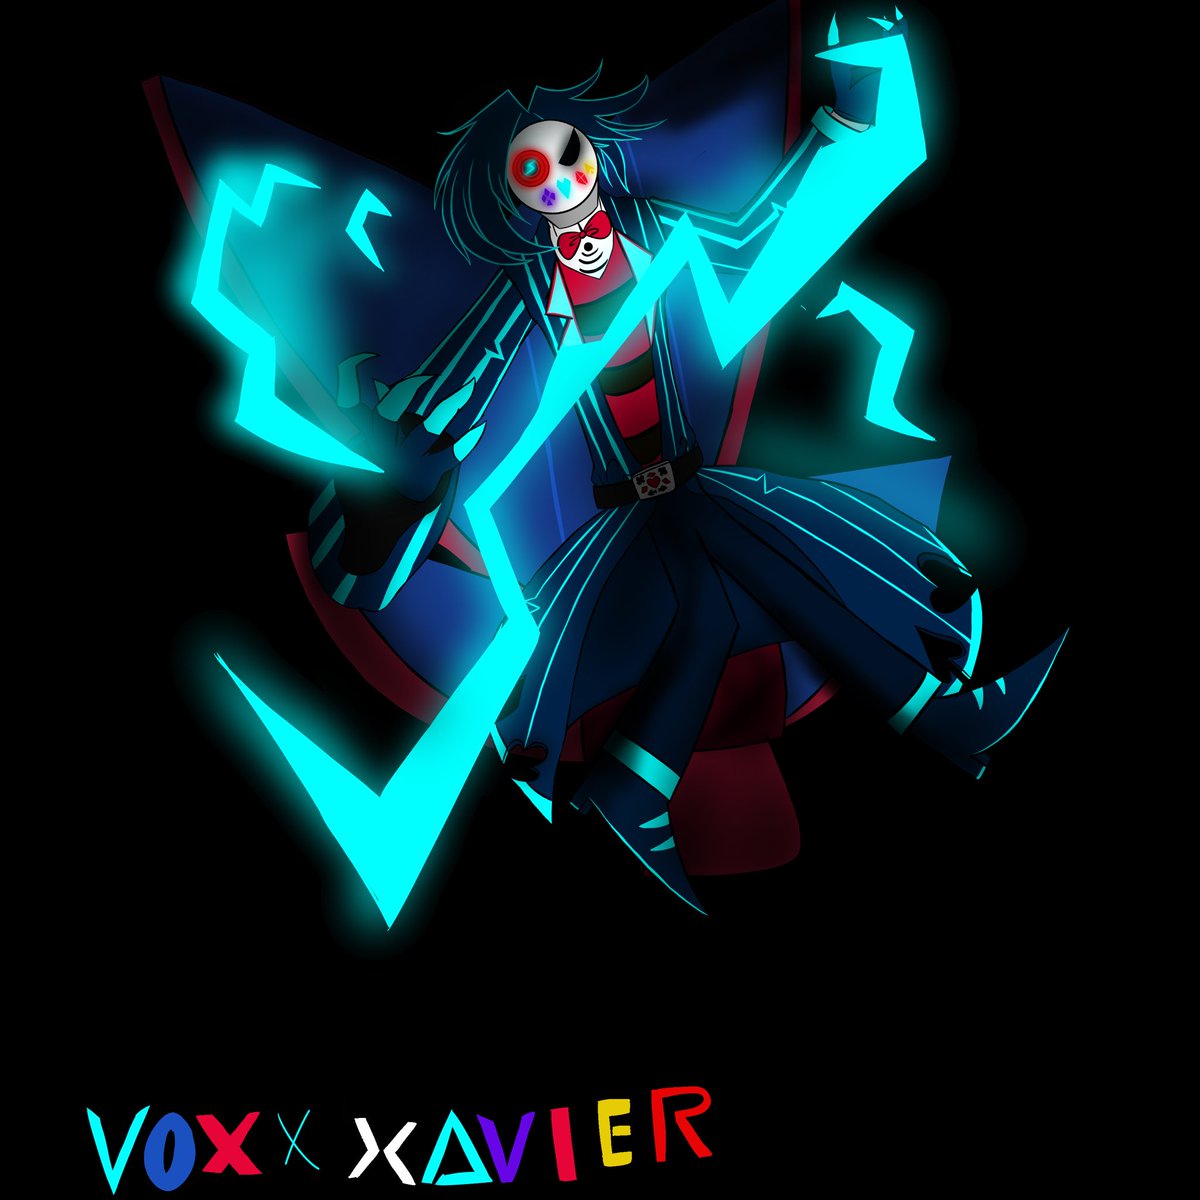 I finished it just in time and you know I think it turned out great and I think the torso design was a little messed up but idc I’m just happy to see its finished btw it’s vox x Xavier Rotom #DARadio